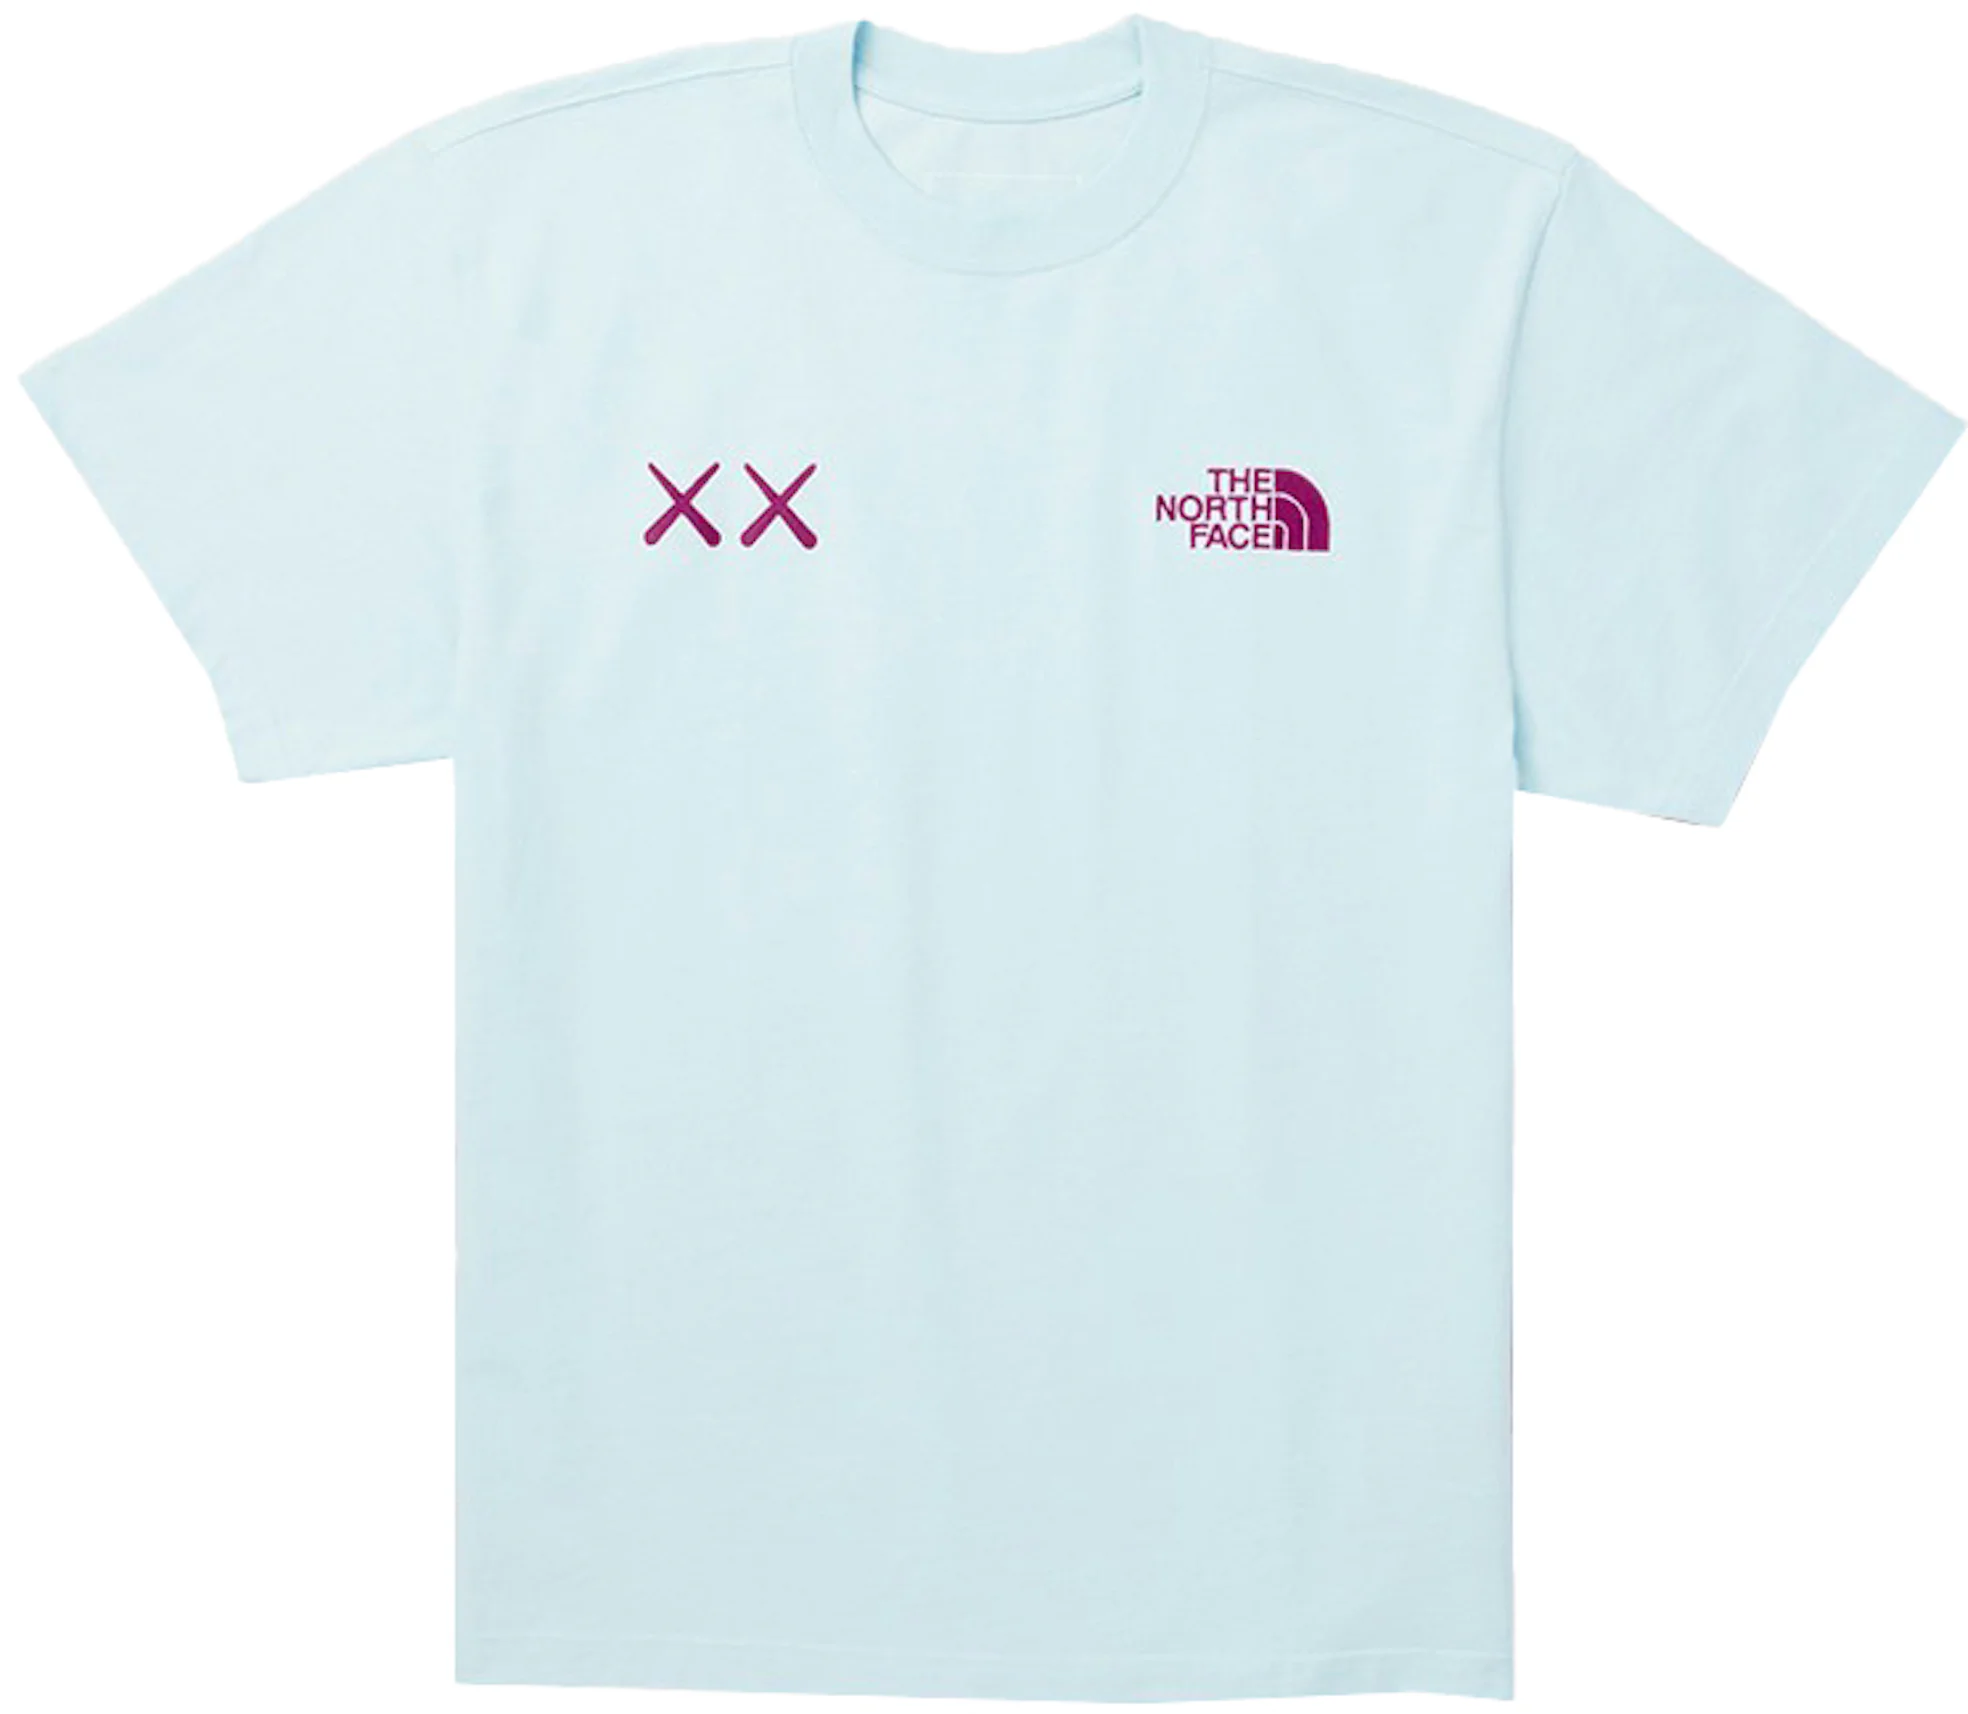 KAWS x The North Face Tee Ice Blue Men's - FW21 - US